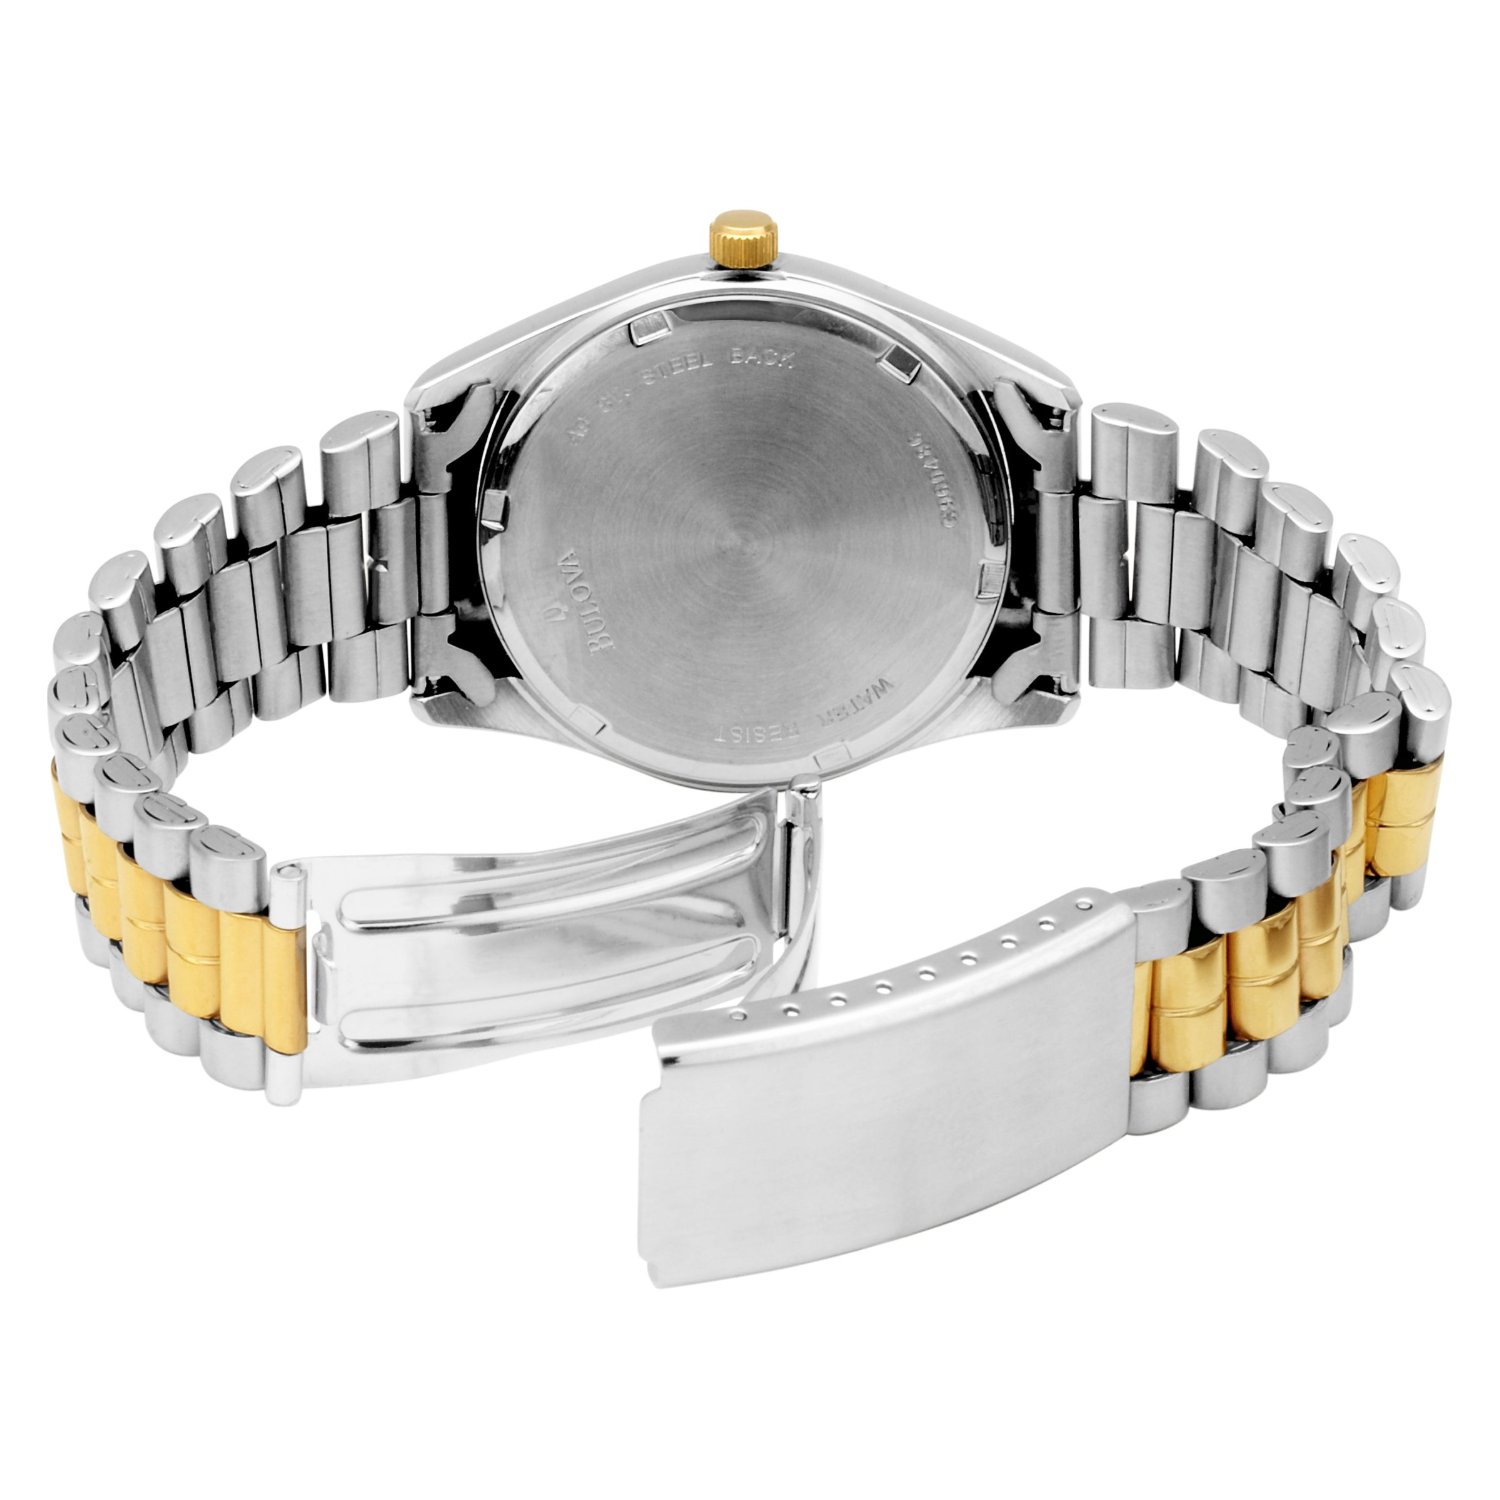 45A08 Caravelle By Bulova Men's bracelet watch with silver patterned dial with gilt markers